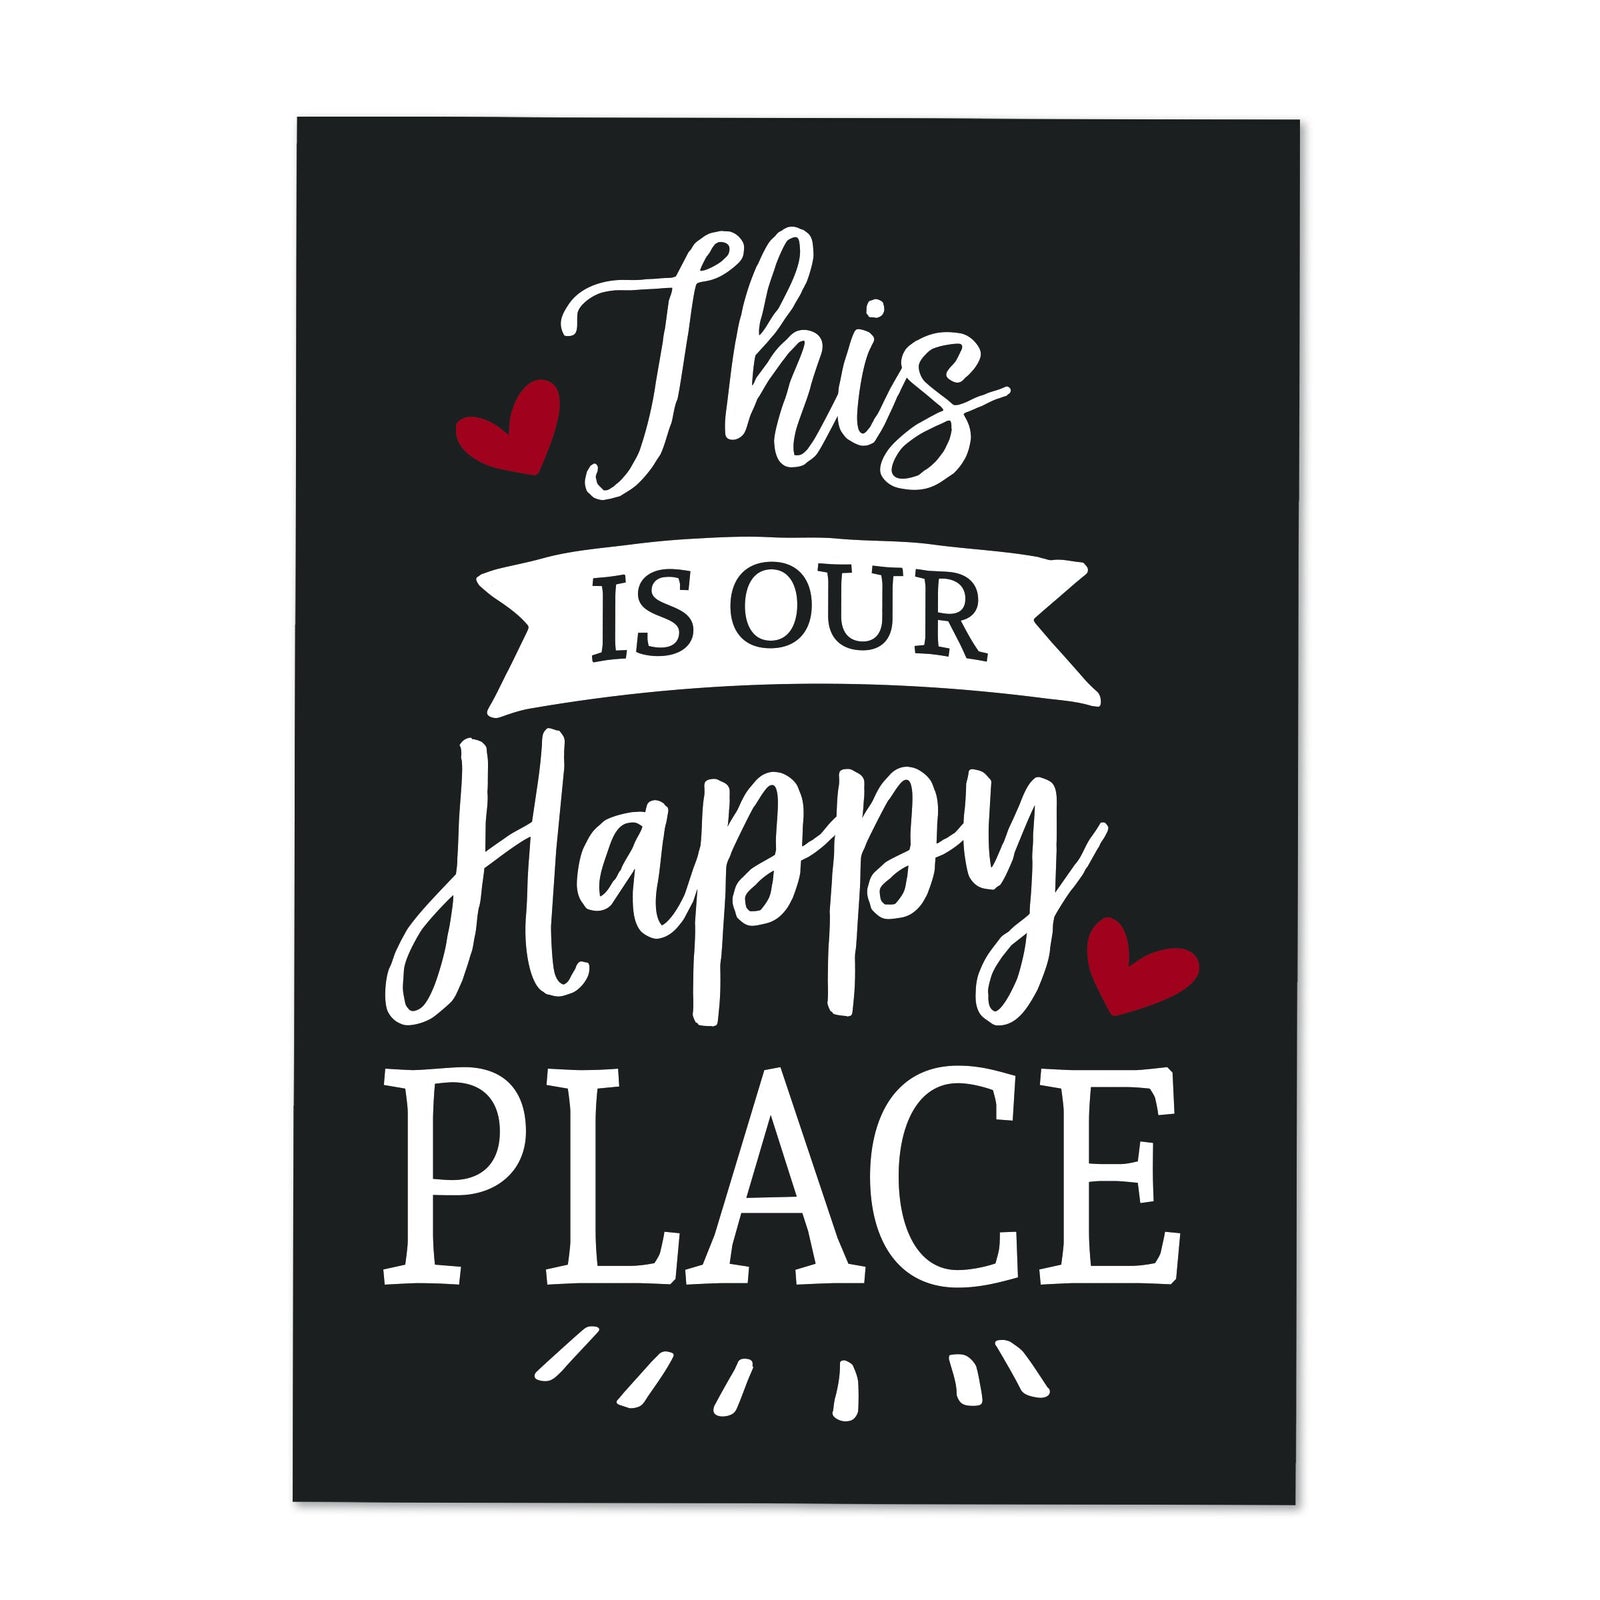 LifeSong Milestones Home Sign Wall Decorations for Living Room - Home Wall Art - Wooden Plaque Sign Gift 6“ x 8” Our Happy Place Black